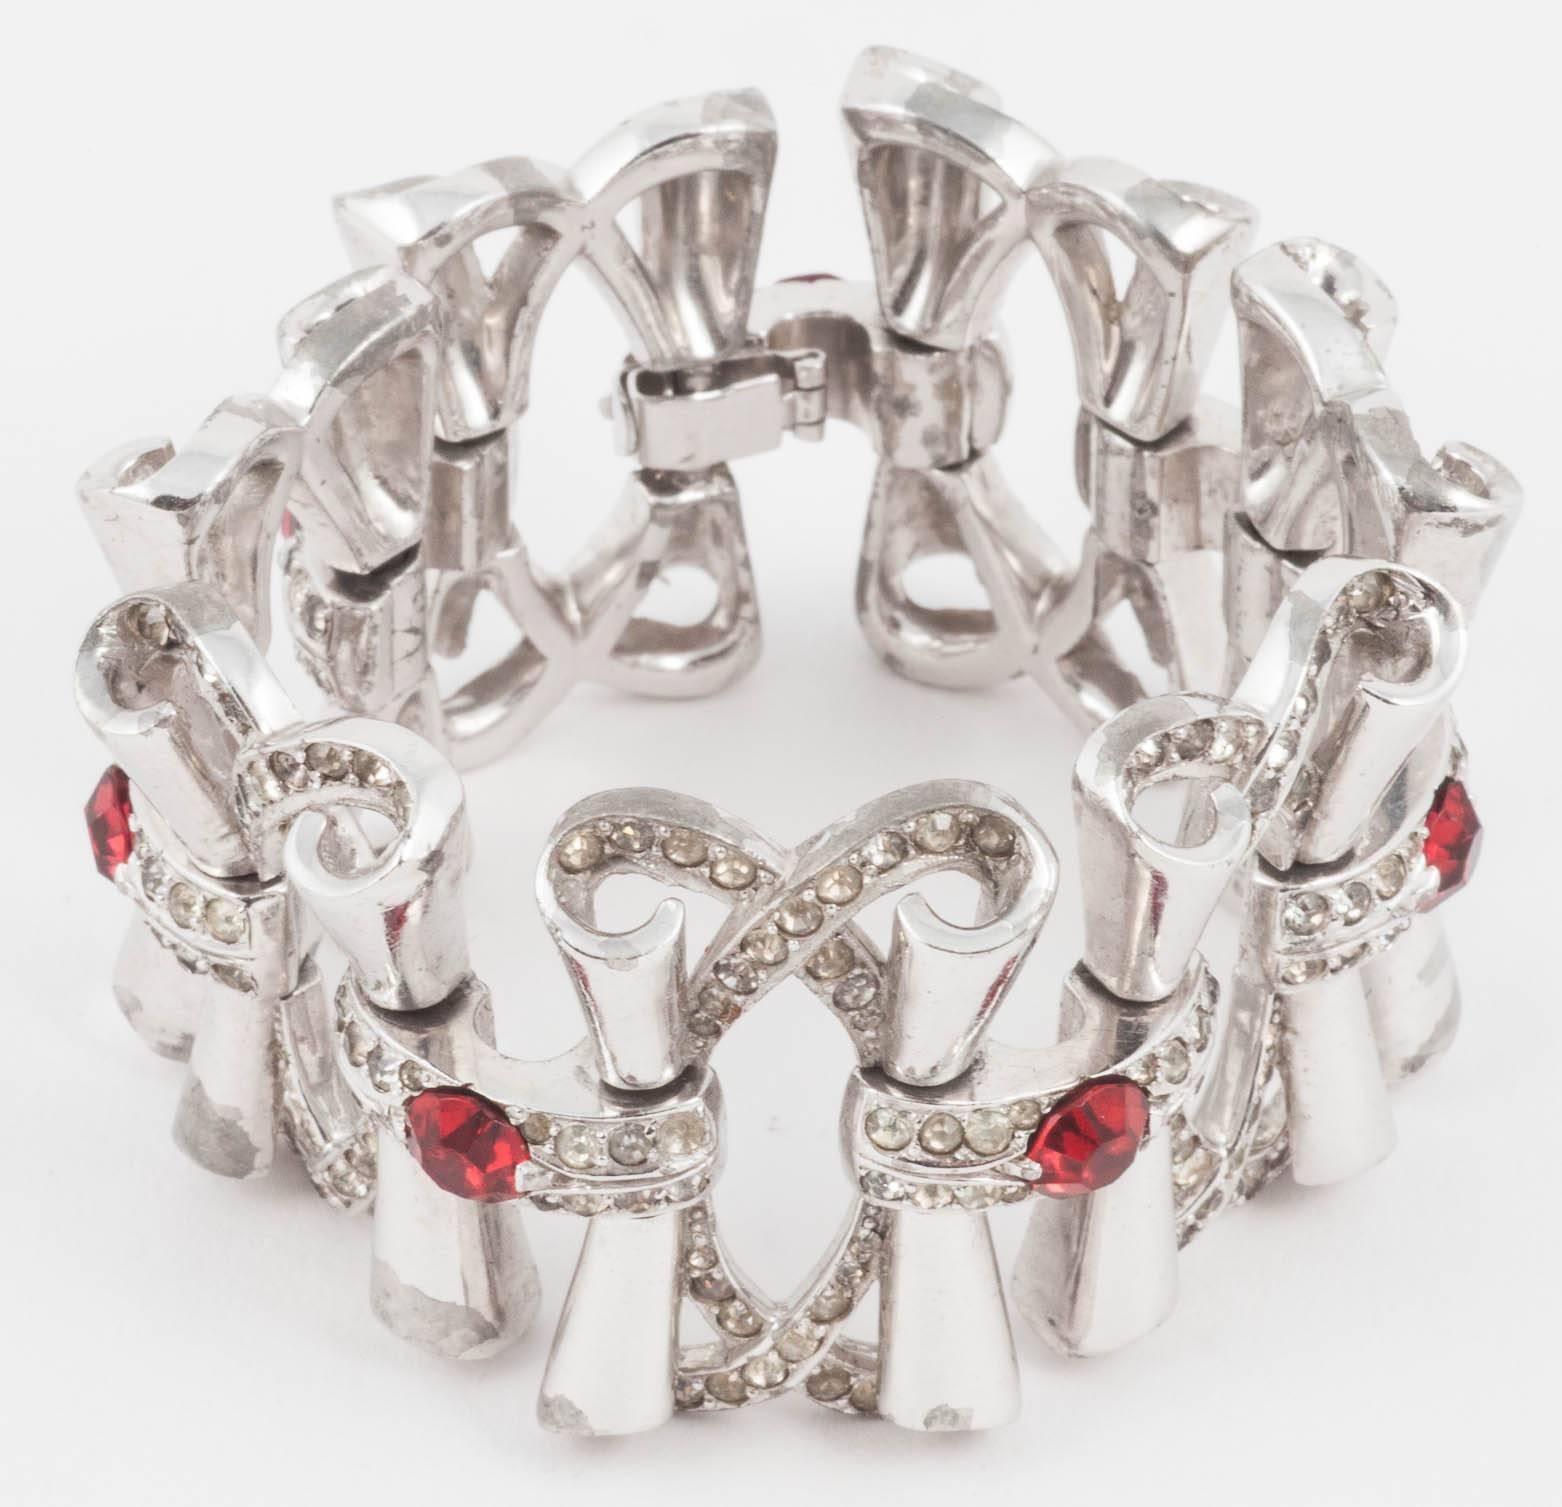 This is a lovely, bold but flowing design in classic 1950s mode. Worn over black gloves it is such a classic look. On a slightly larger modern wrist, it would look great with a jewel sleeved sweater or jacket. Sparkly winter cheer for your wrist!   